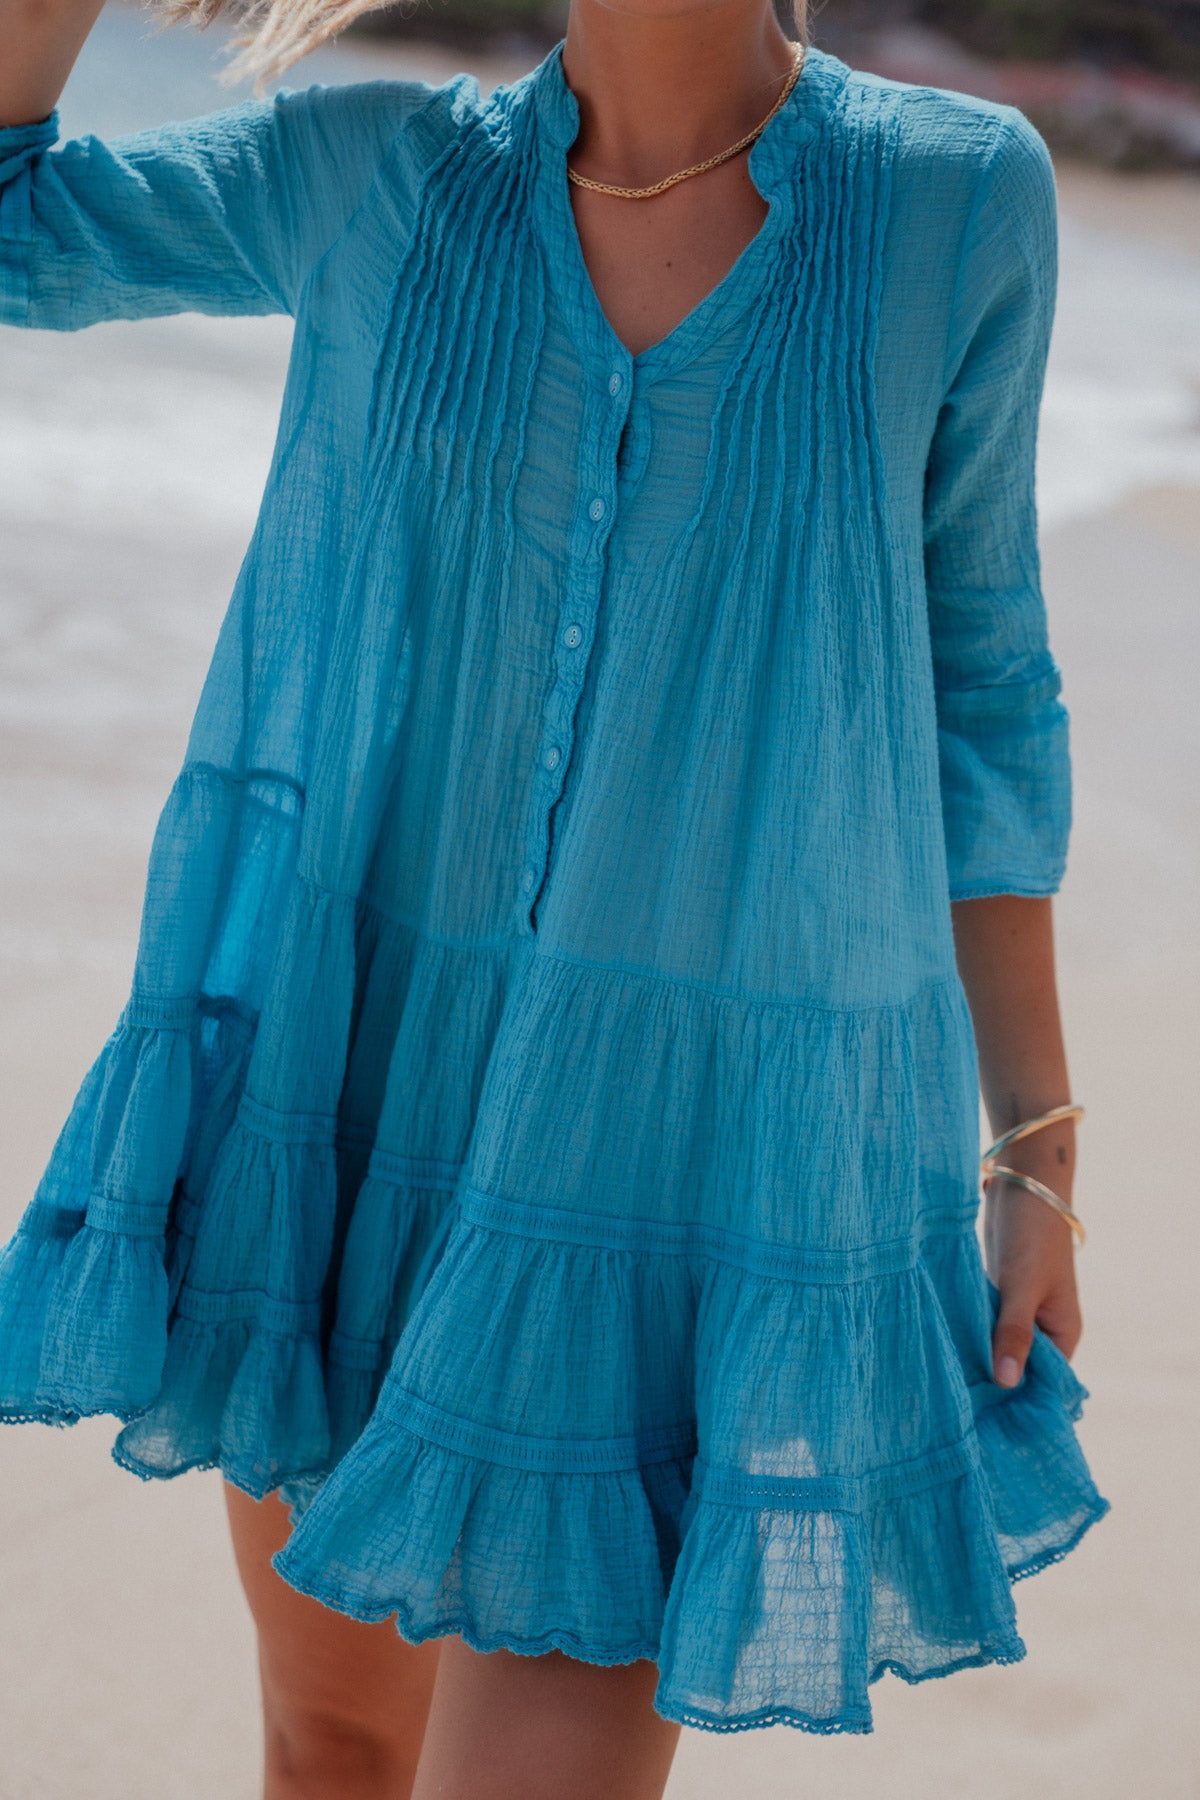 Bella Ciao Cotton Dress Turquoise